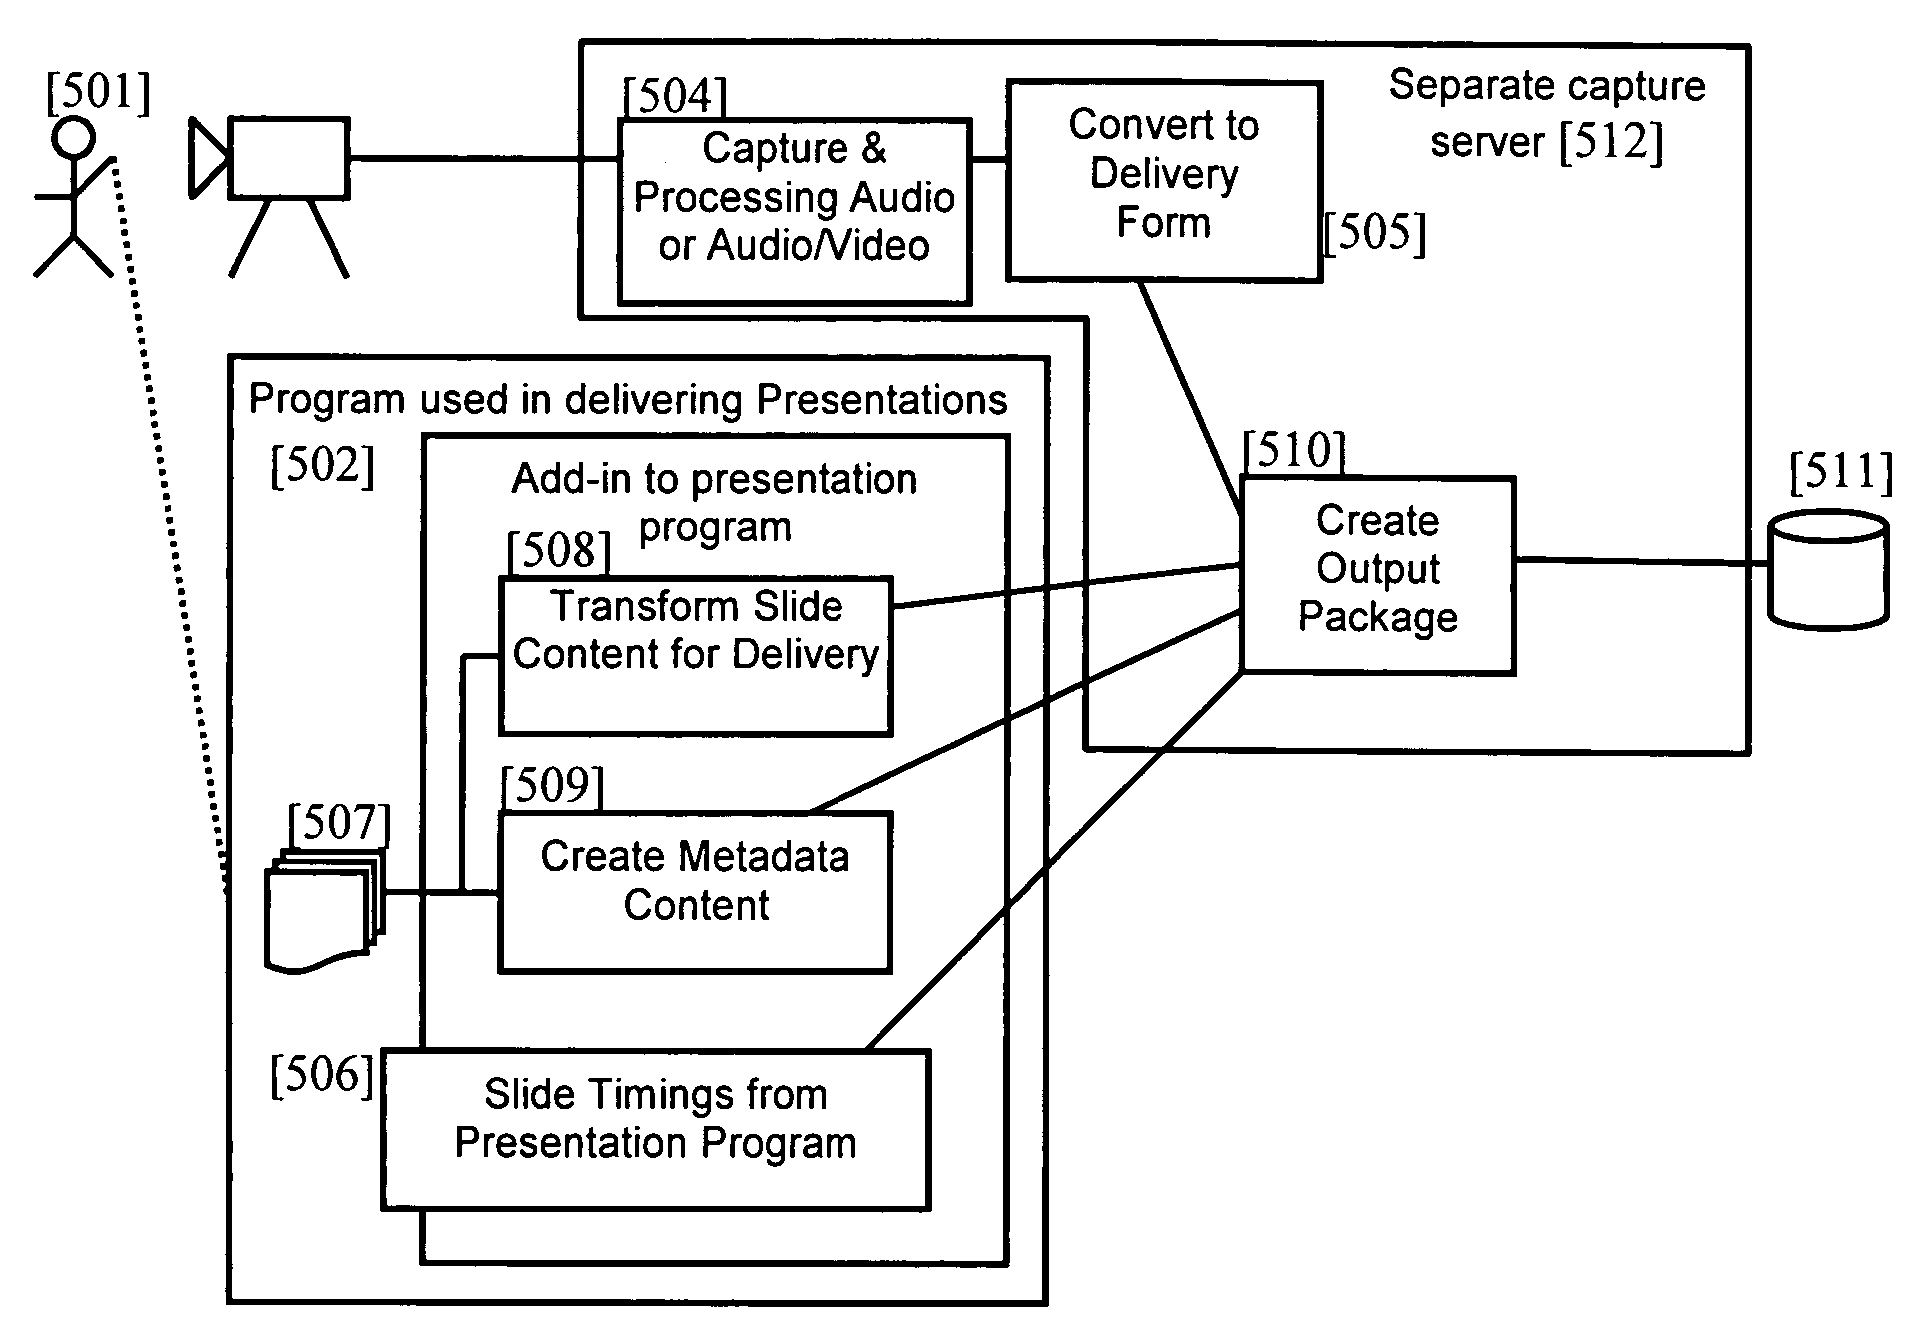 Method for capturing, encoding, packaging, and distributing multimedia presentations